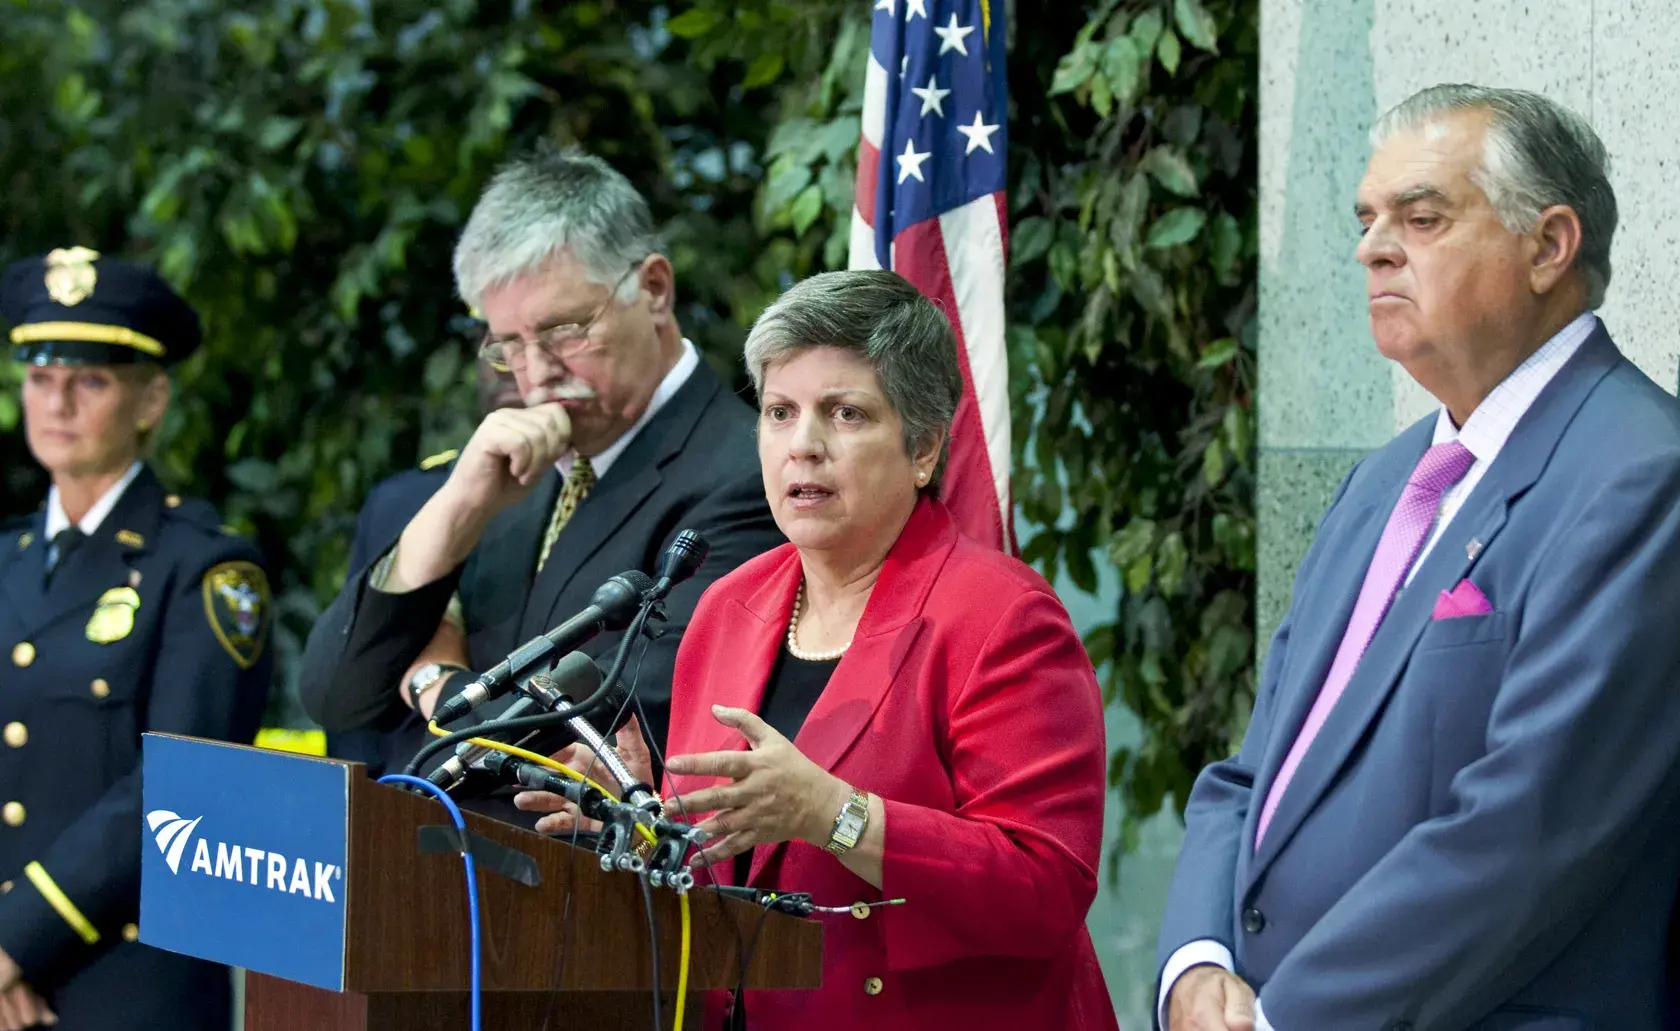 This morning, Secretary Napolitano joined Secretary of Transportation and Amtrak President and CEO Joseph Boardman to announce a new partnership.